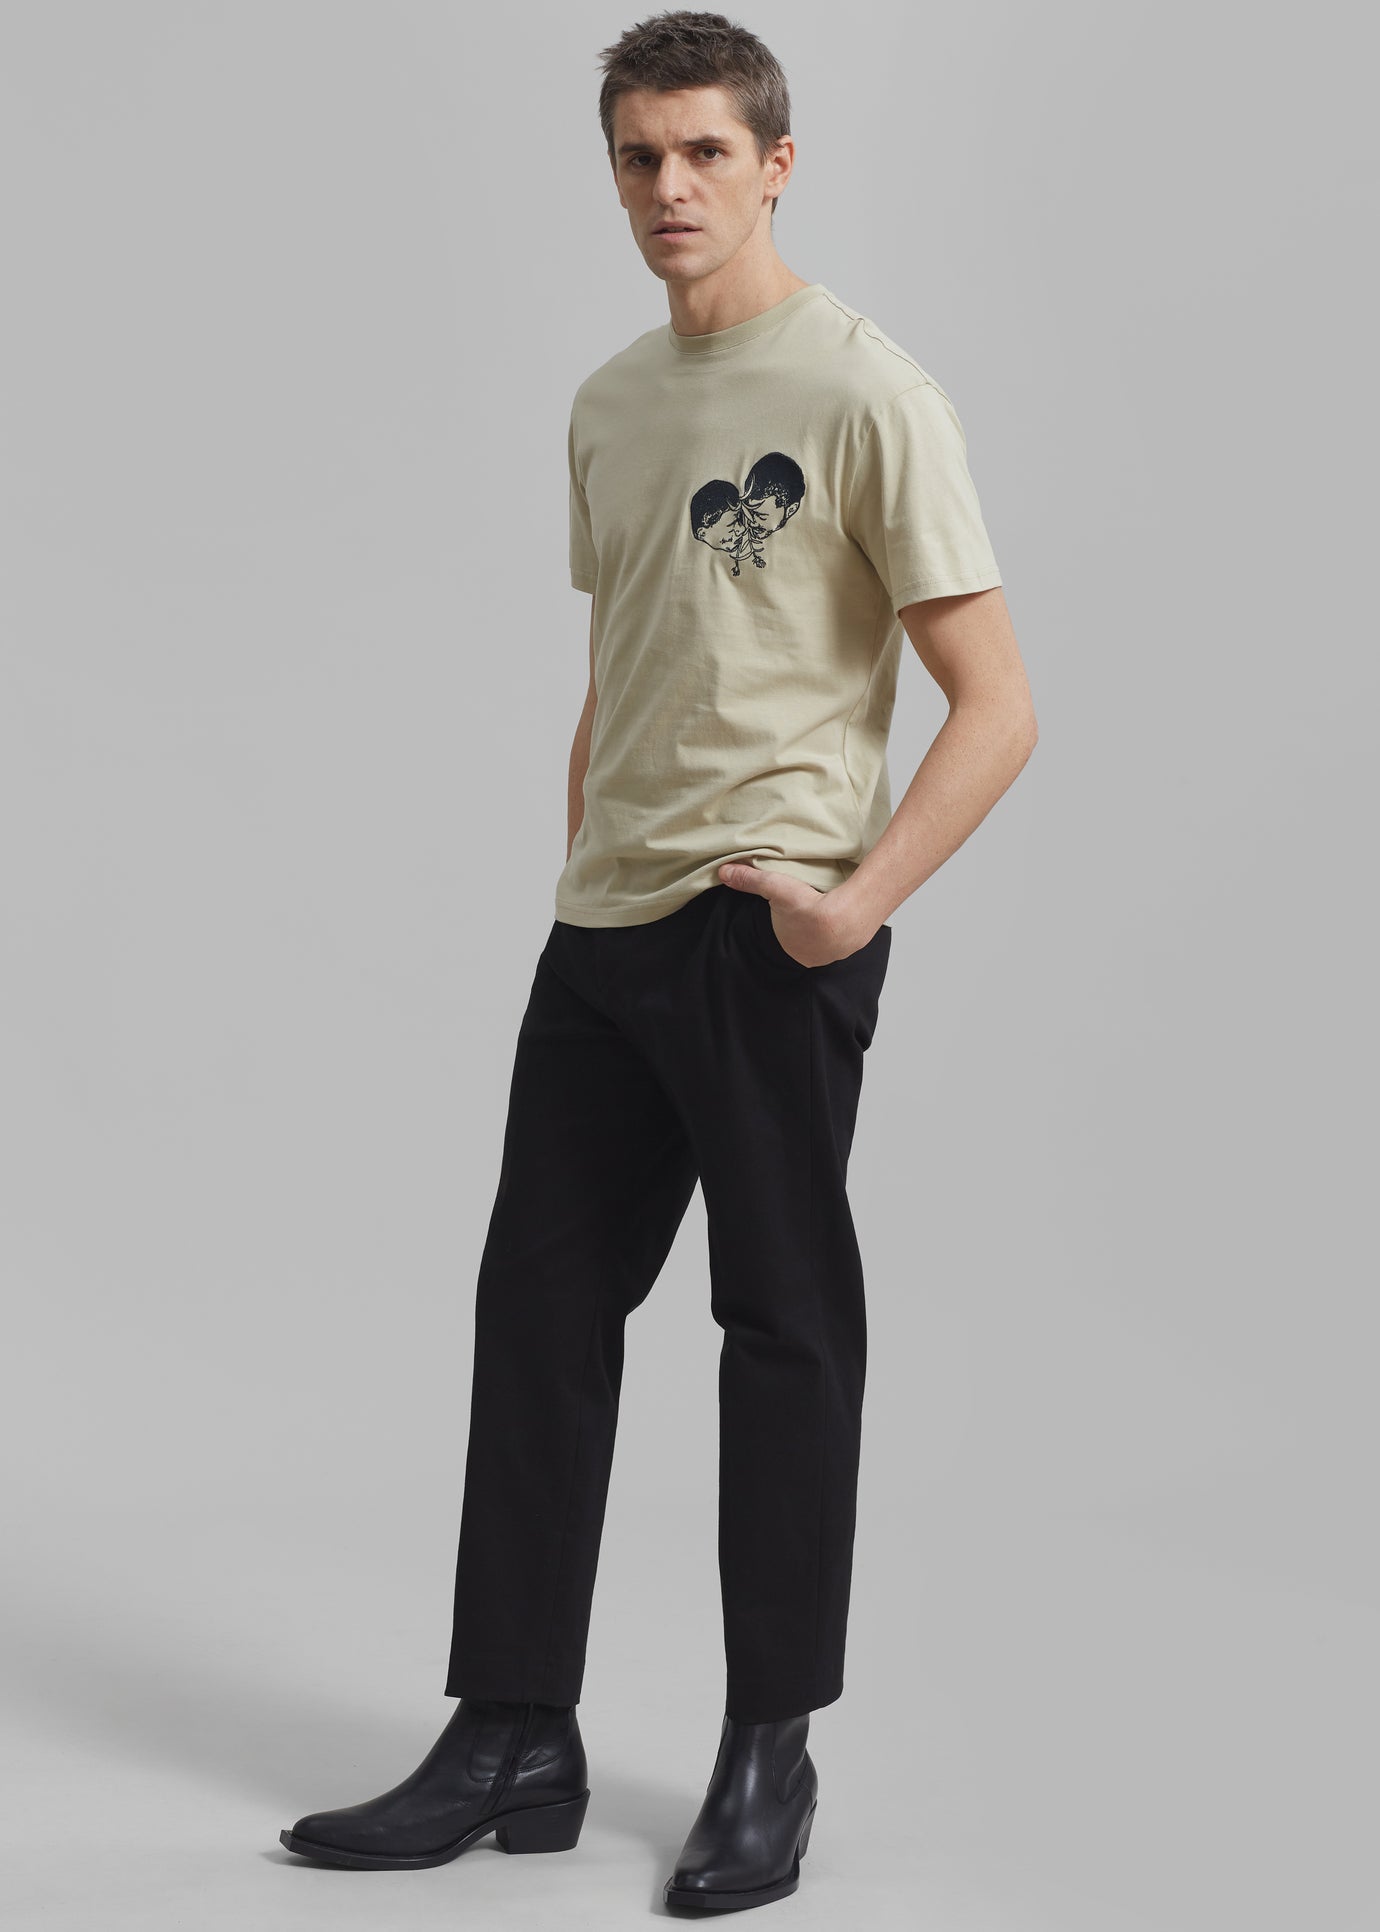 JW Anderson Polo Couple Embroidery T-Shirt - Beige